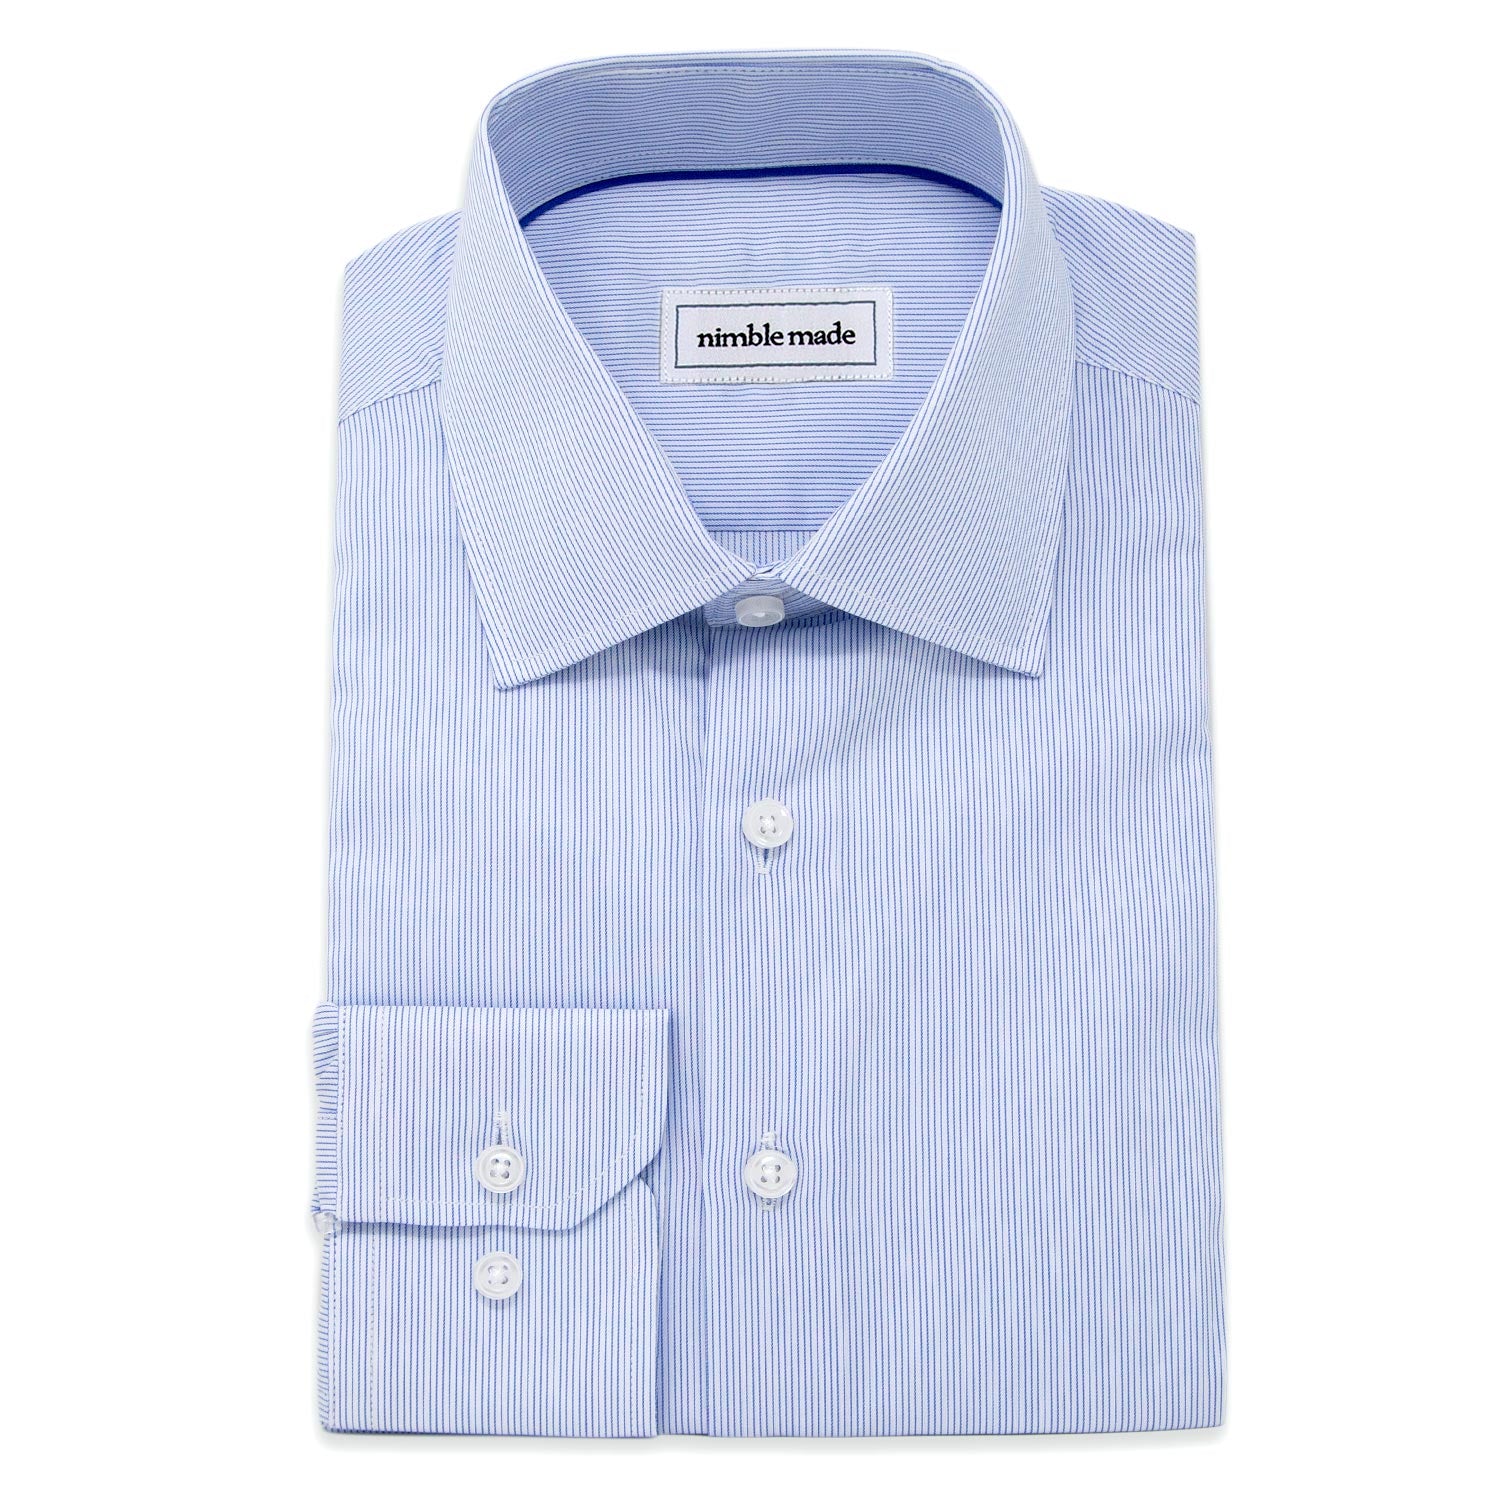 white and blue striped dress shirt for men